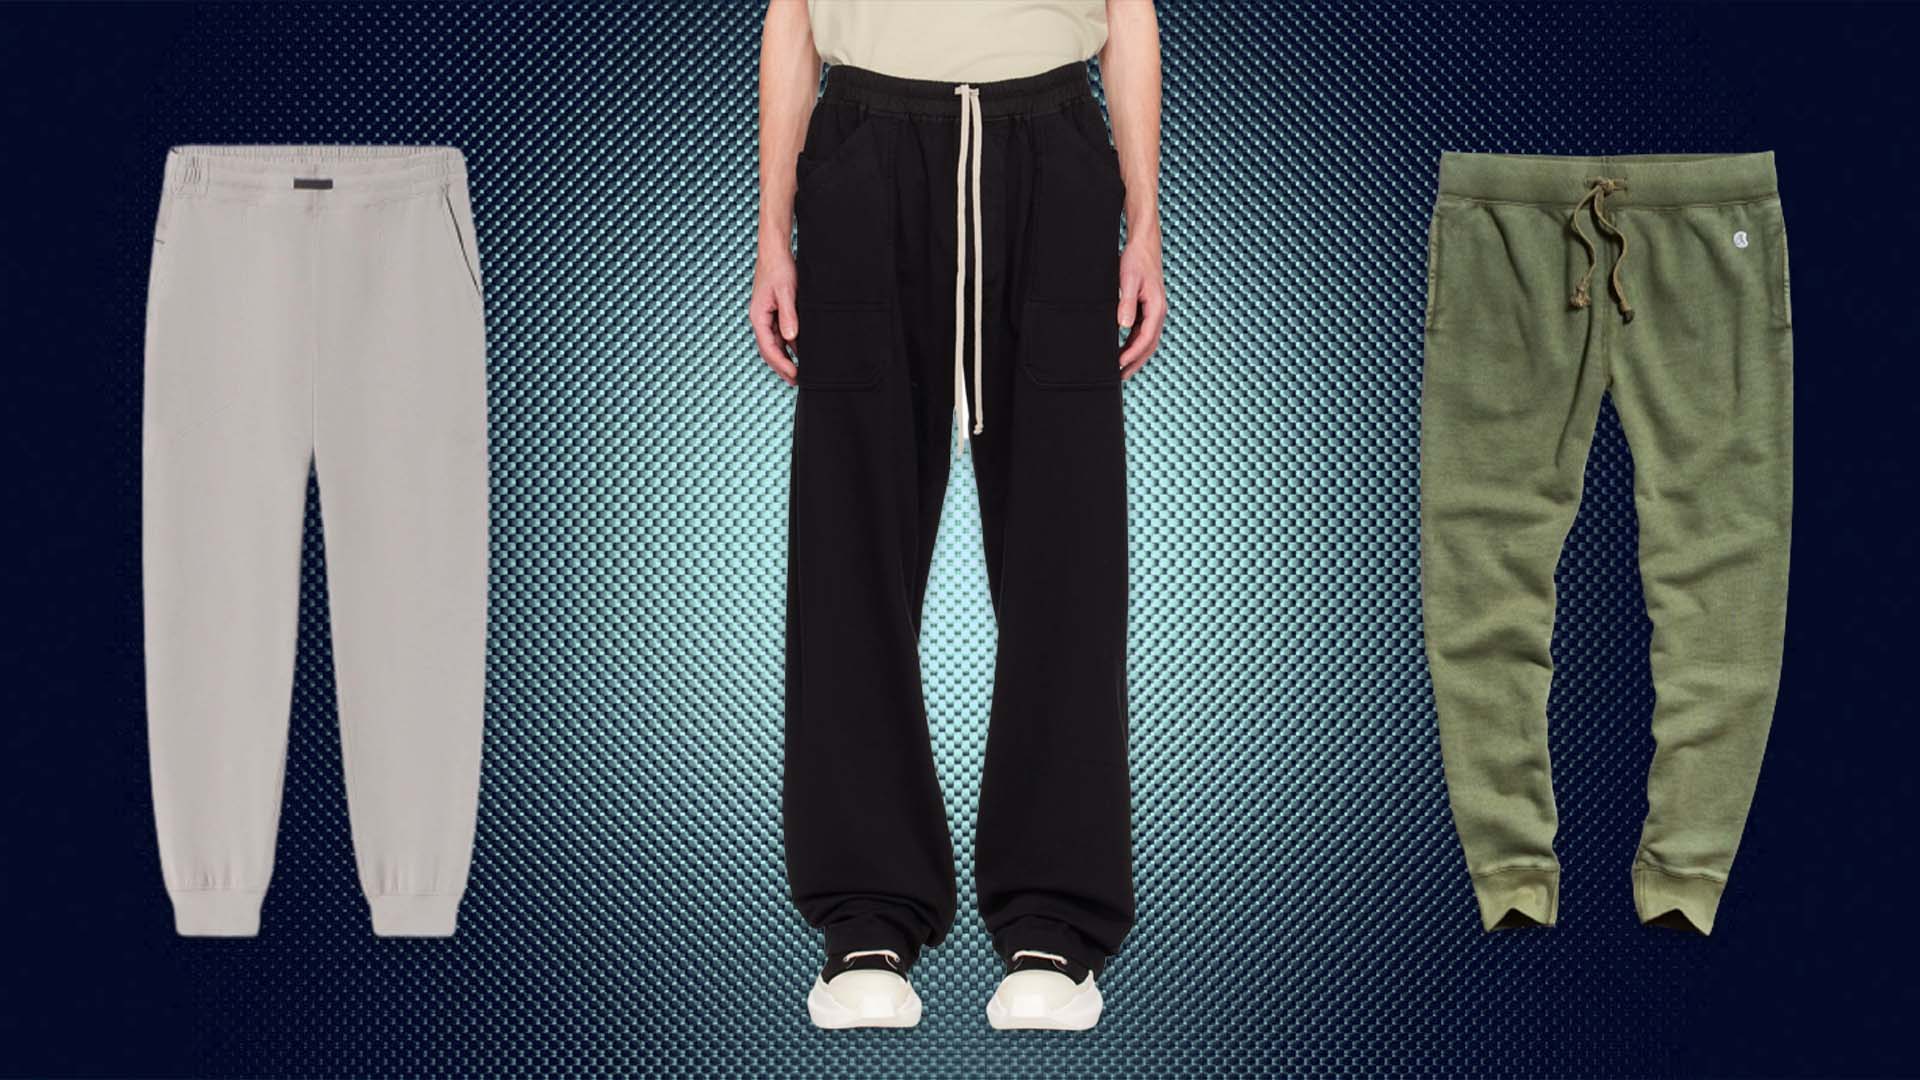 Xersion Relaxed Sweat Pants for Men